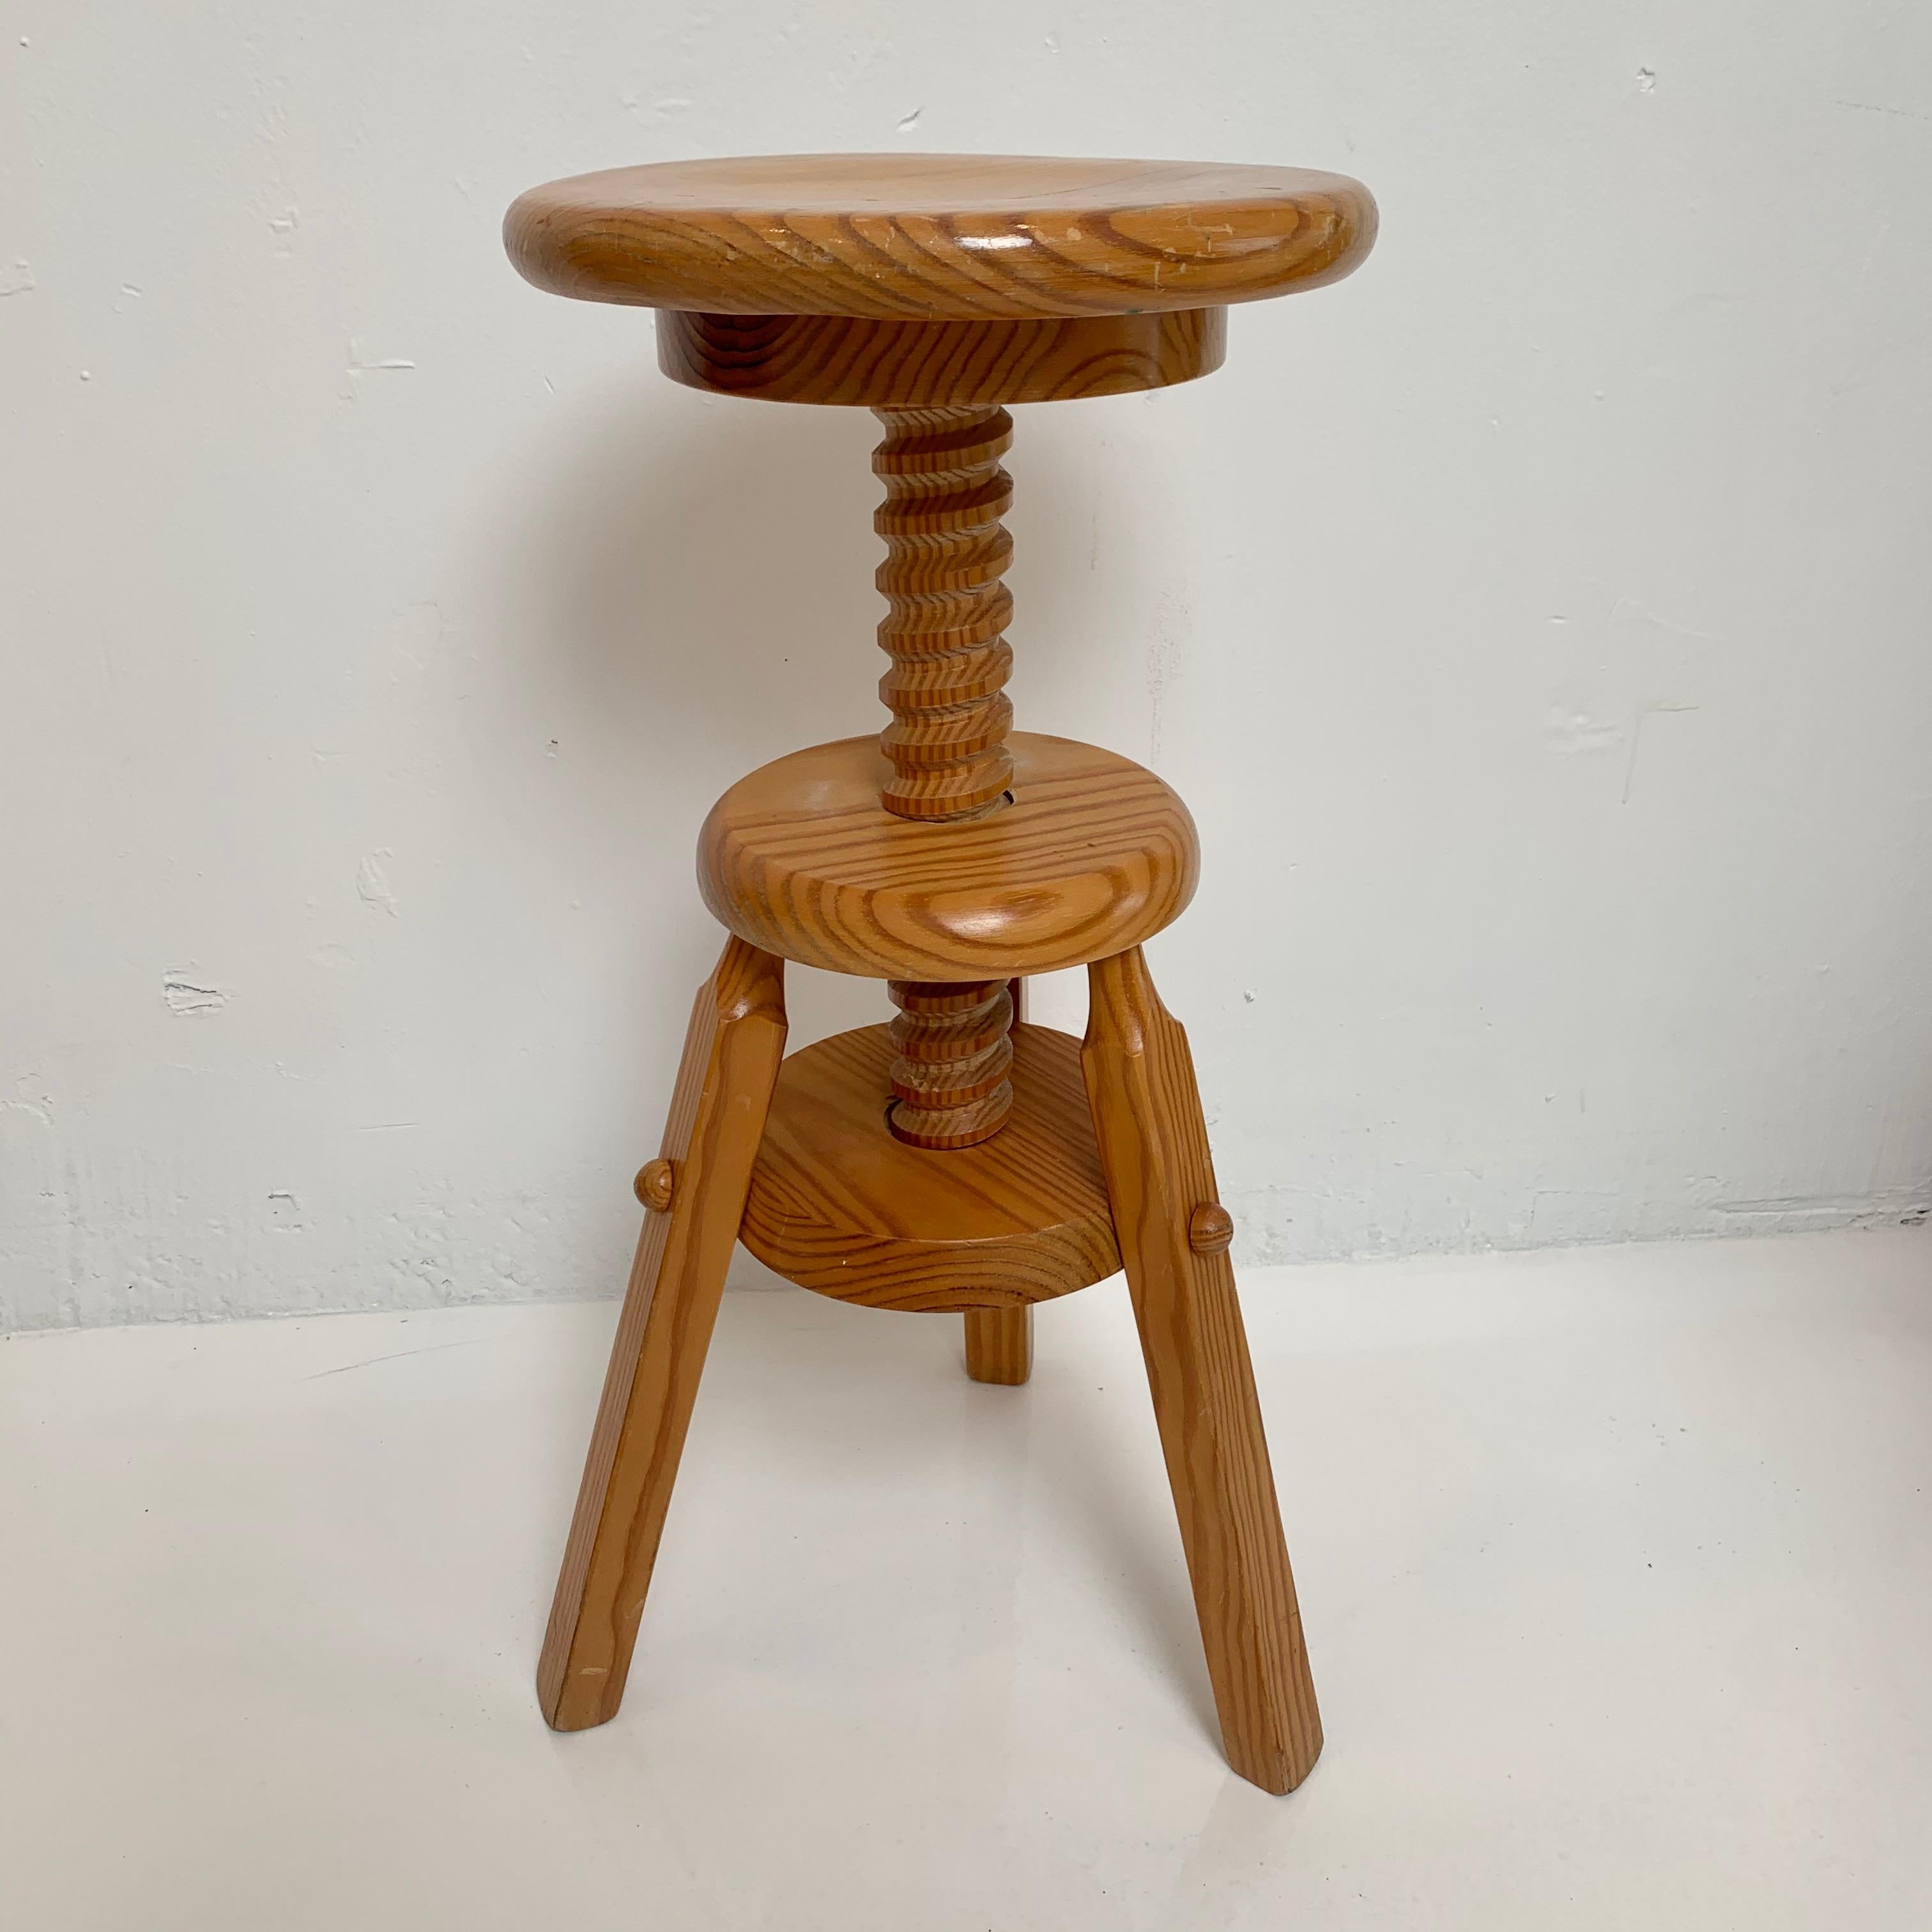 Artistic pine stool made entirely of wood. Large wood screw attached to seat allows the stool to change heights with a quick spin. Great for the piano, show casing art or a standalone seat. Good vintage condition. Measures: Height adjusts from